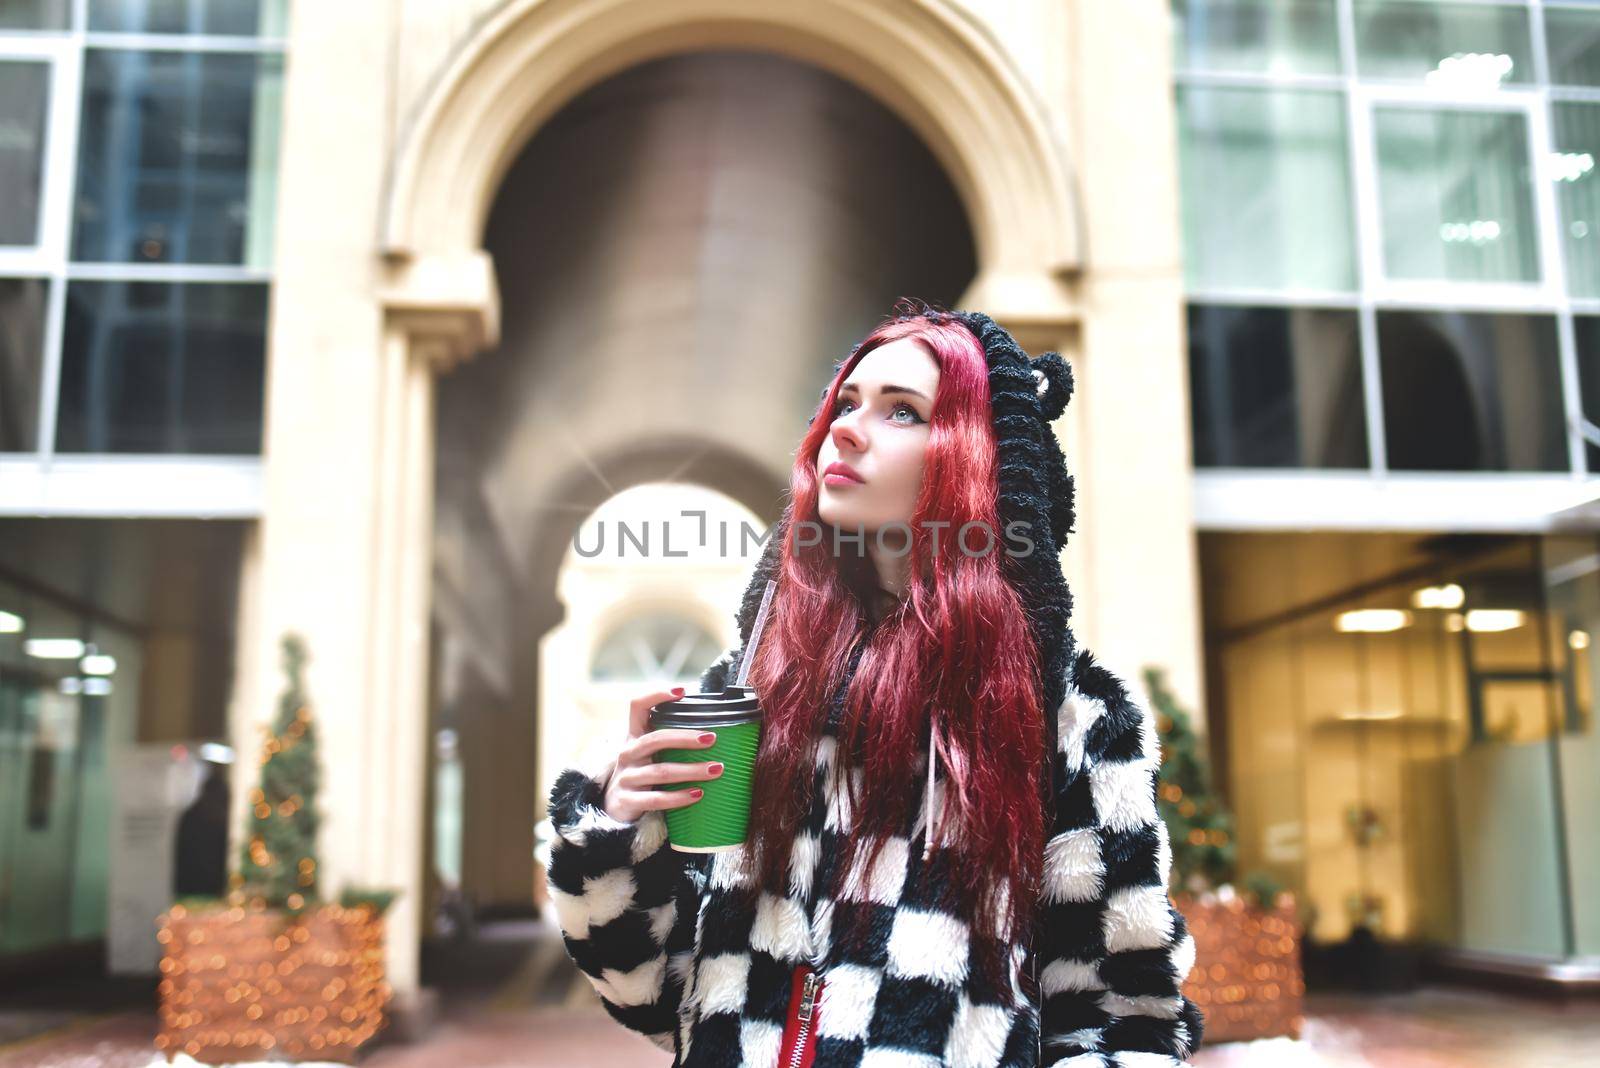 a portrait of a teen girl with red hair in warm clothes walking outside on a cold day with a cup of coffee in her hands and looking up. Cute girl walking with coffee in her hands. by Nickstock